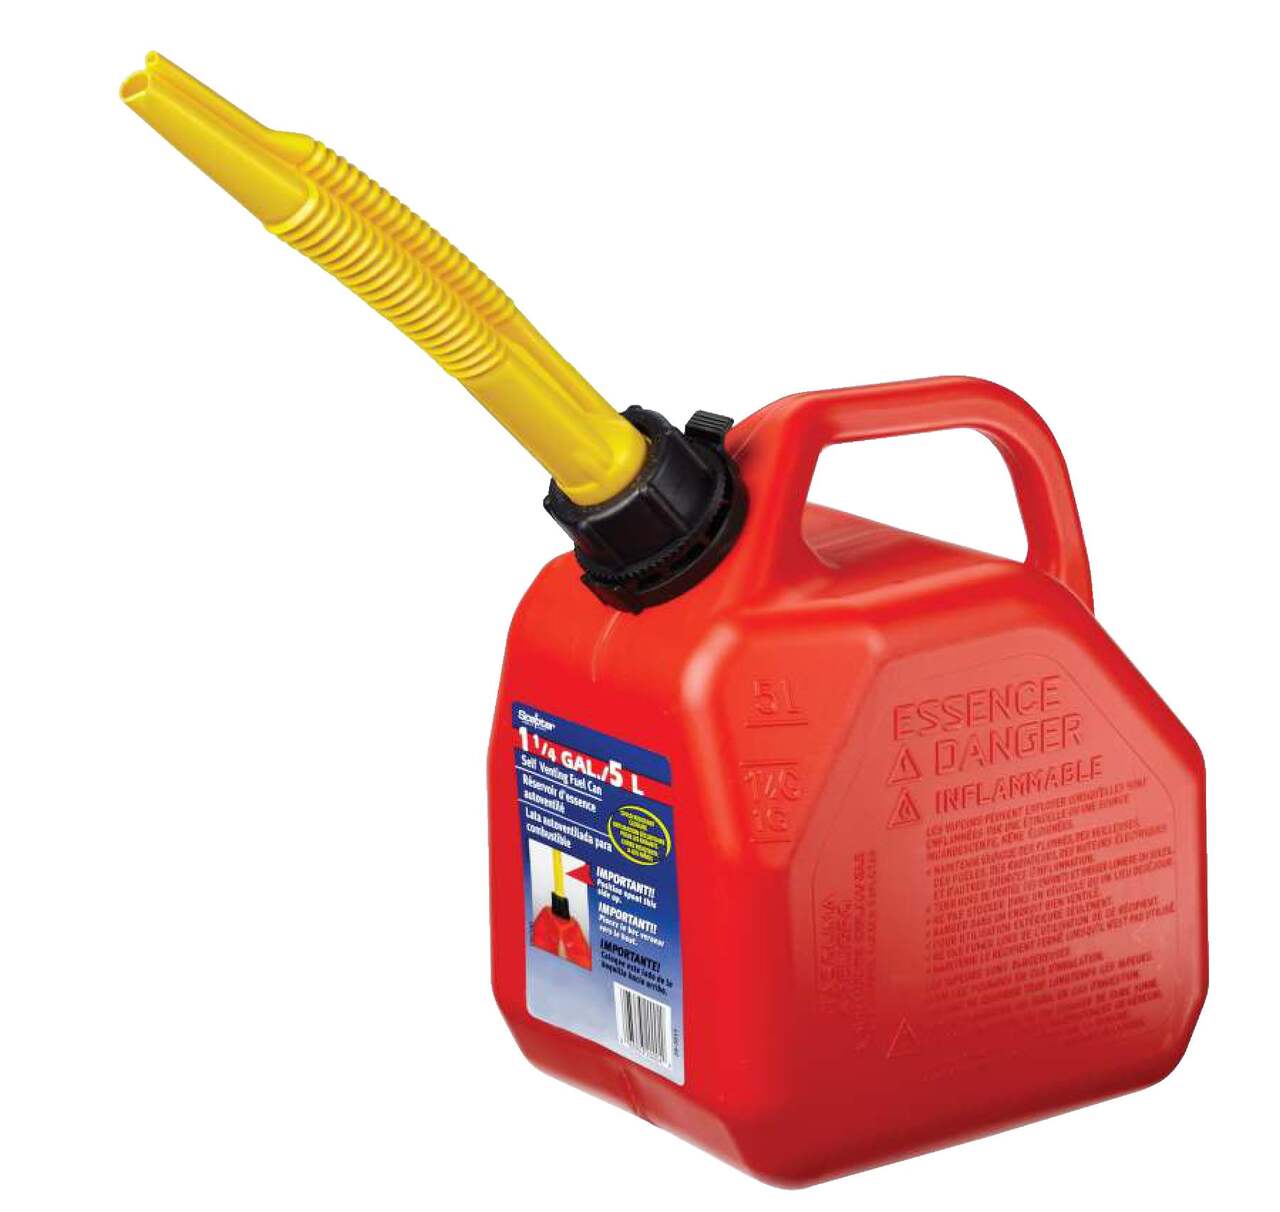 https://media-www.canadiantire.ca/product/automotive/auto-maintenance/oil-change-and-fuel-accessories/0283011/regular-gas-can-5l-eb066062-a043-472b-991f-bc3c1164e719-jpgrendition.jpg?imdensity=1&imwidth=640&impolicy=mZoom